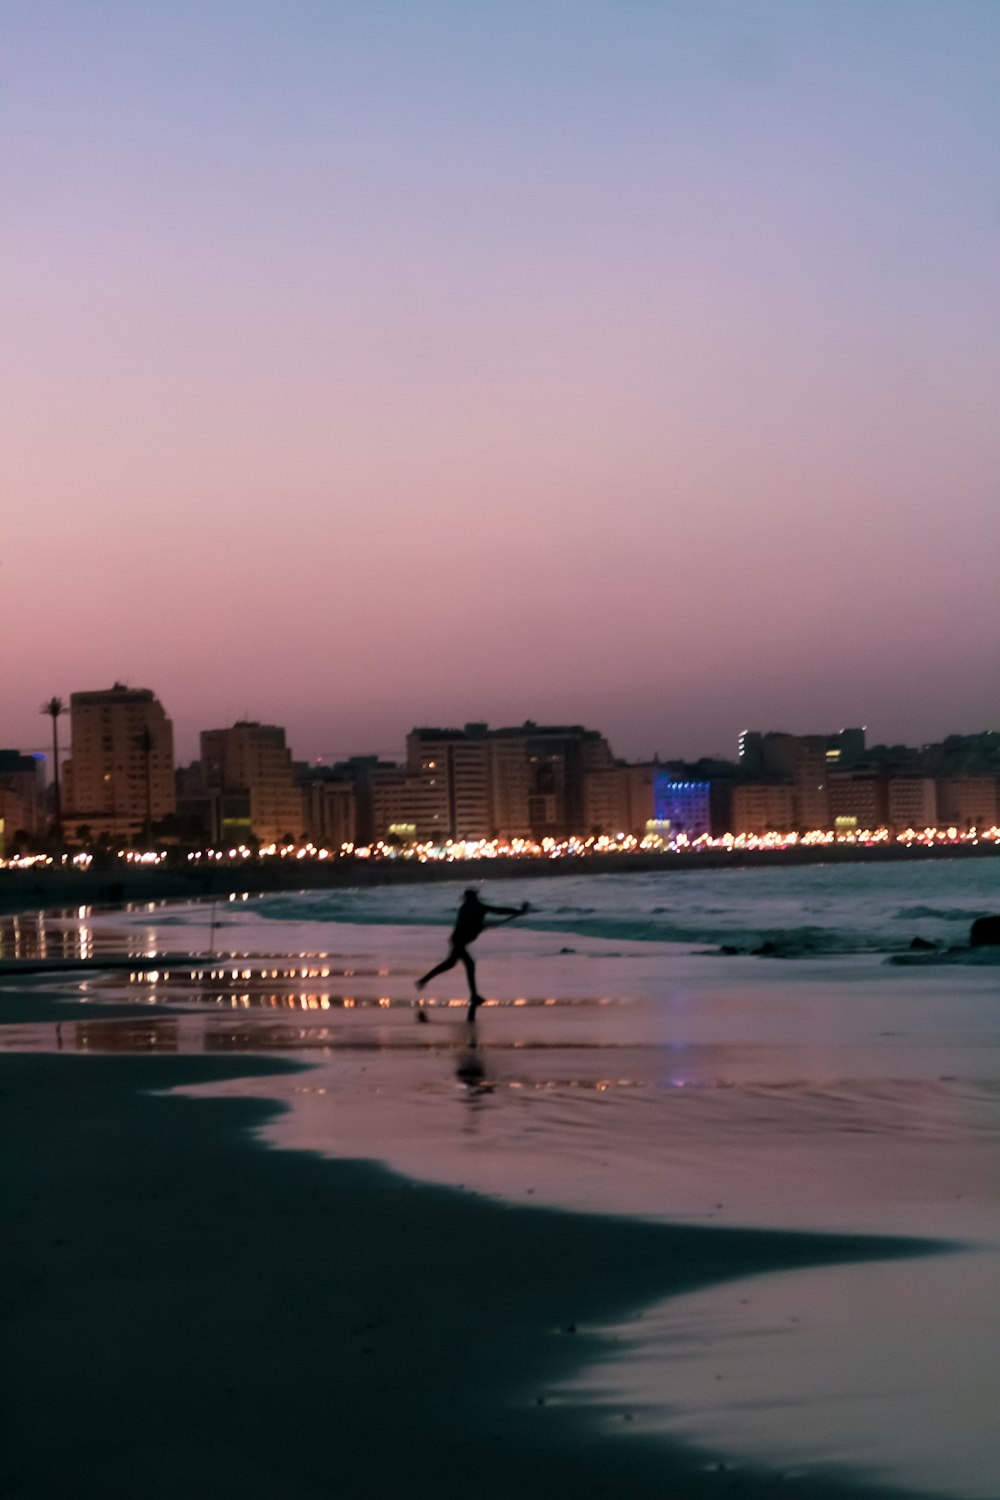 a person walking on a beach with a city in the background